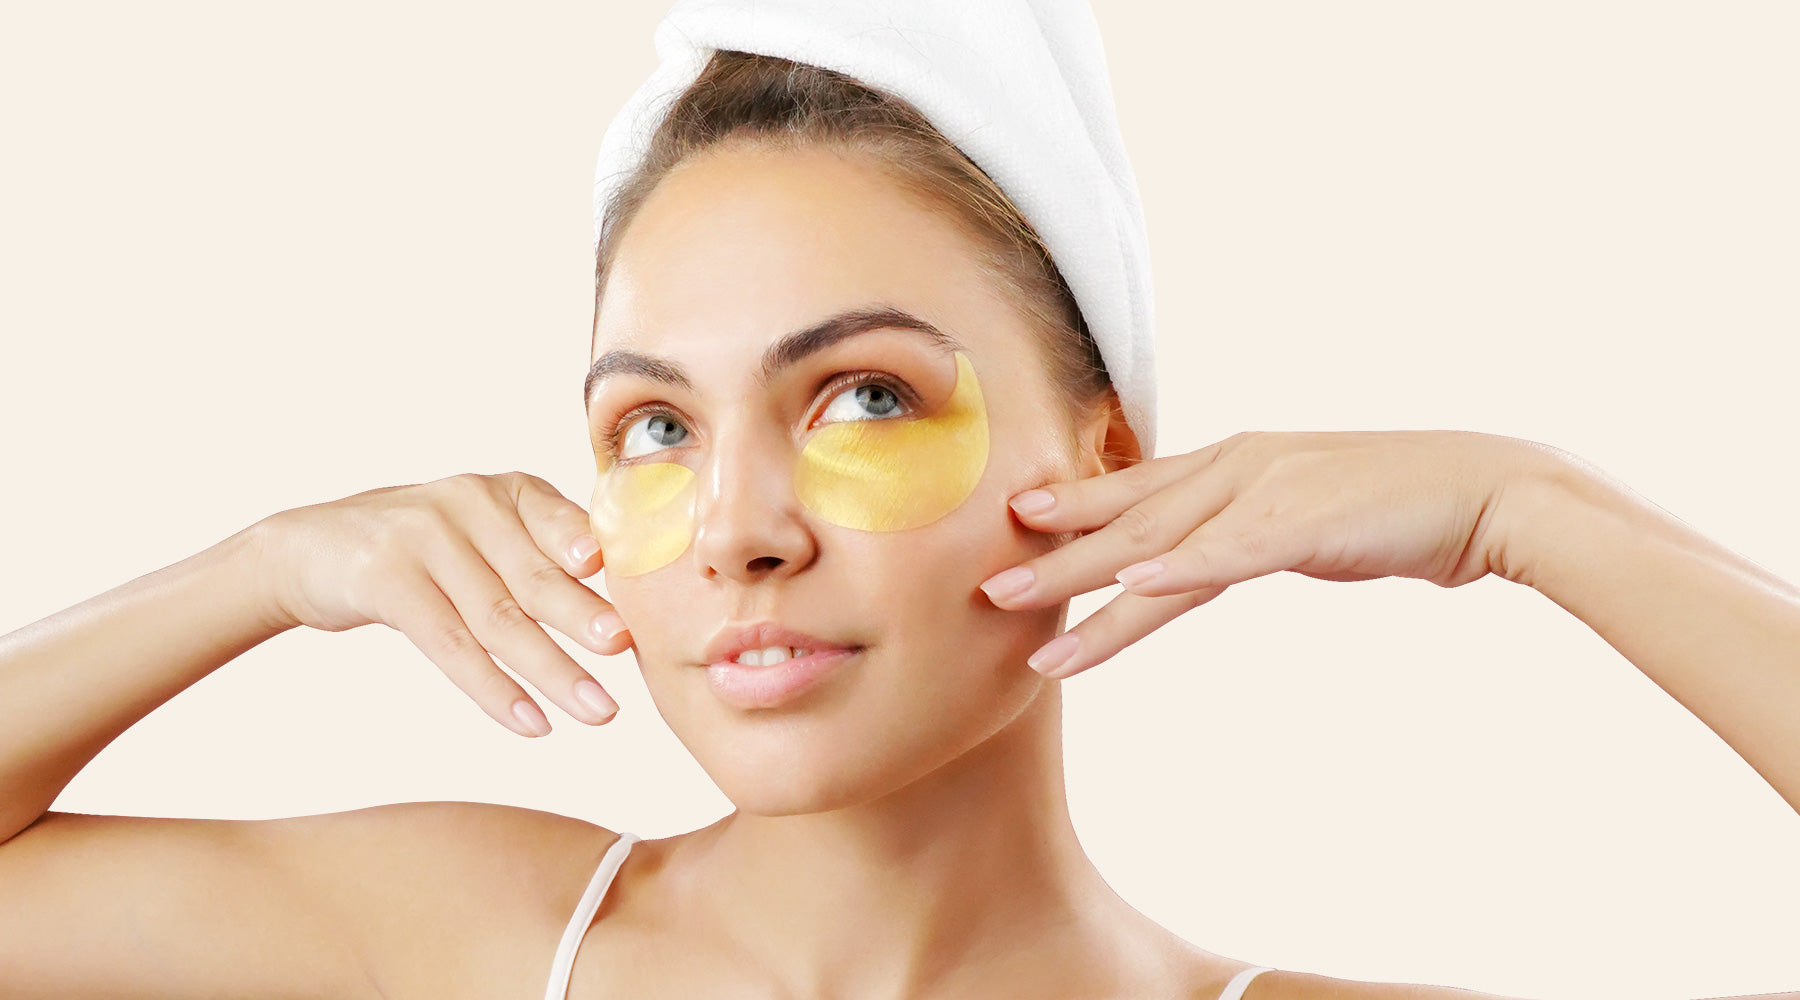 8 Ways To Care For Under-Eye Skin